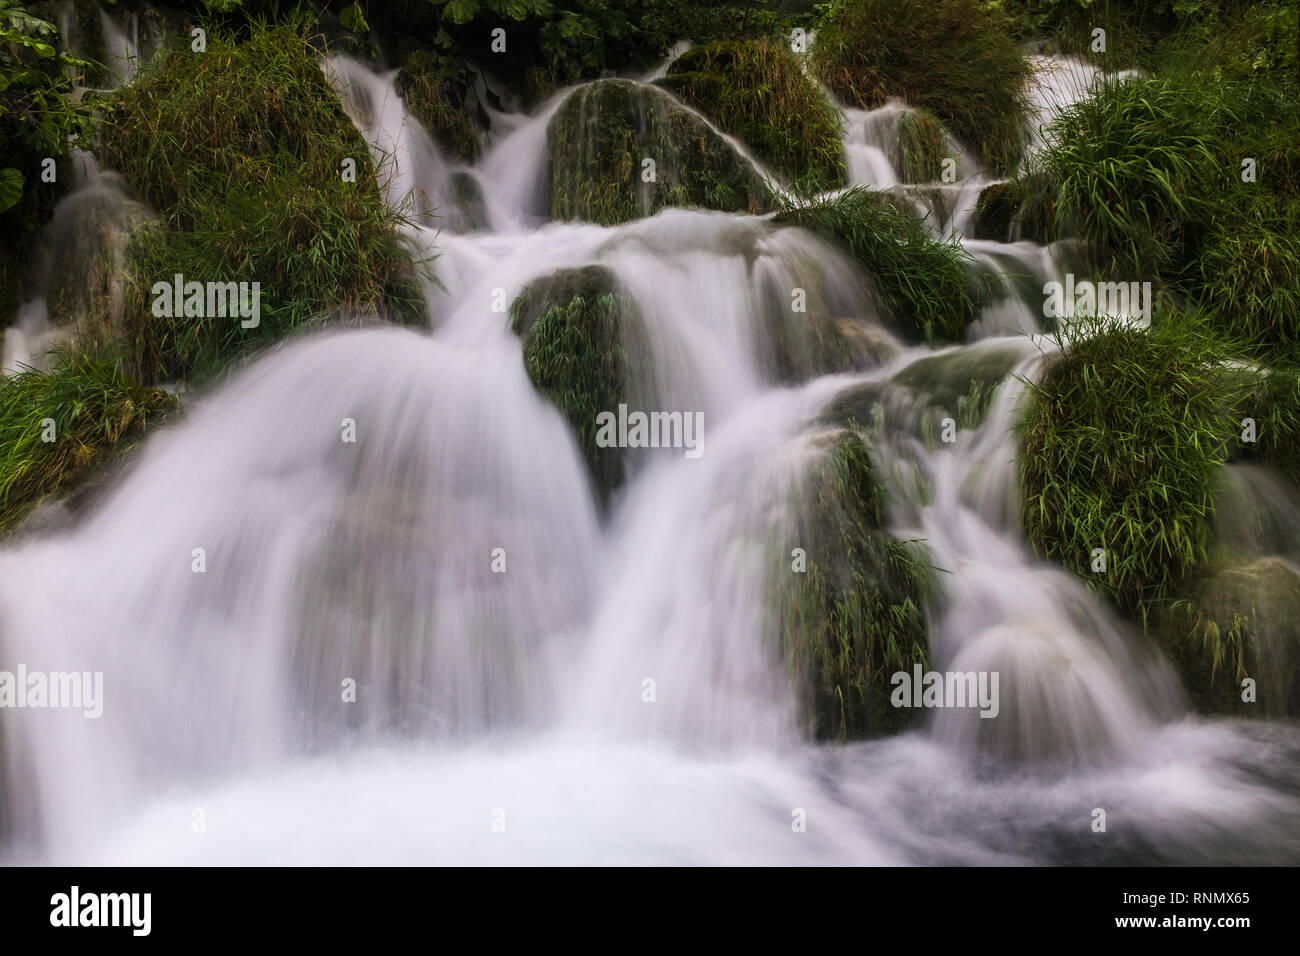 The beautiful and stunning Plitvice Lake National Park, Croatia, close up head on shot of a waterfall, slow shutter speed to smooth out the water Stock Photo